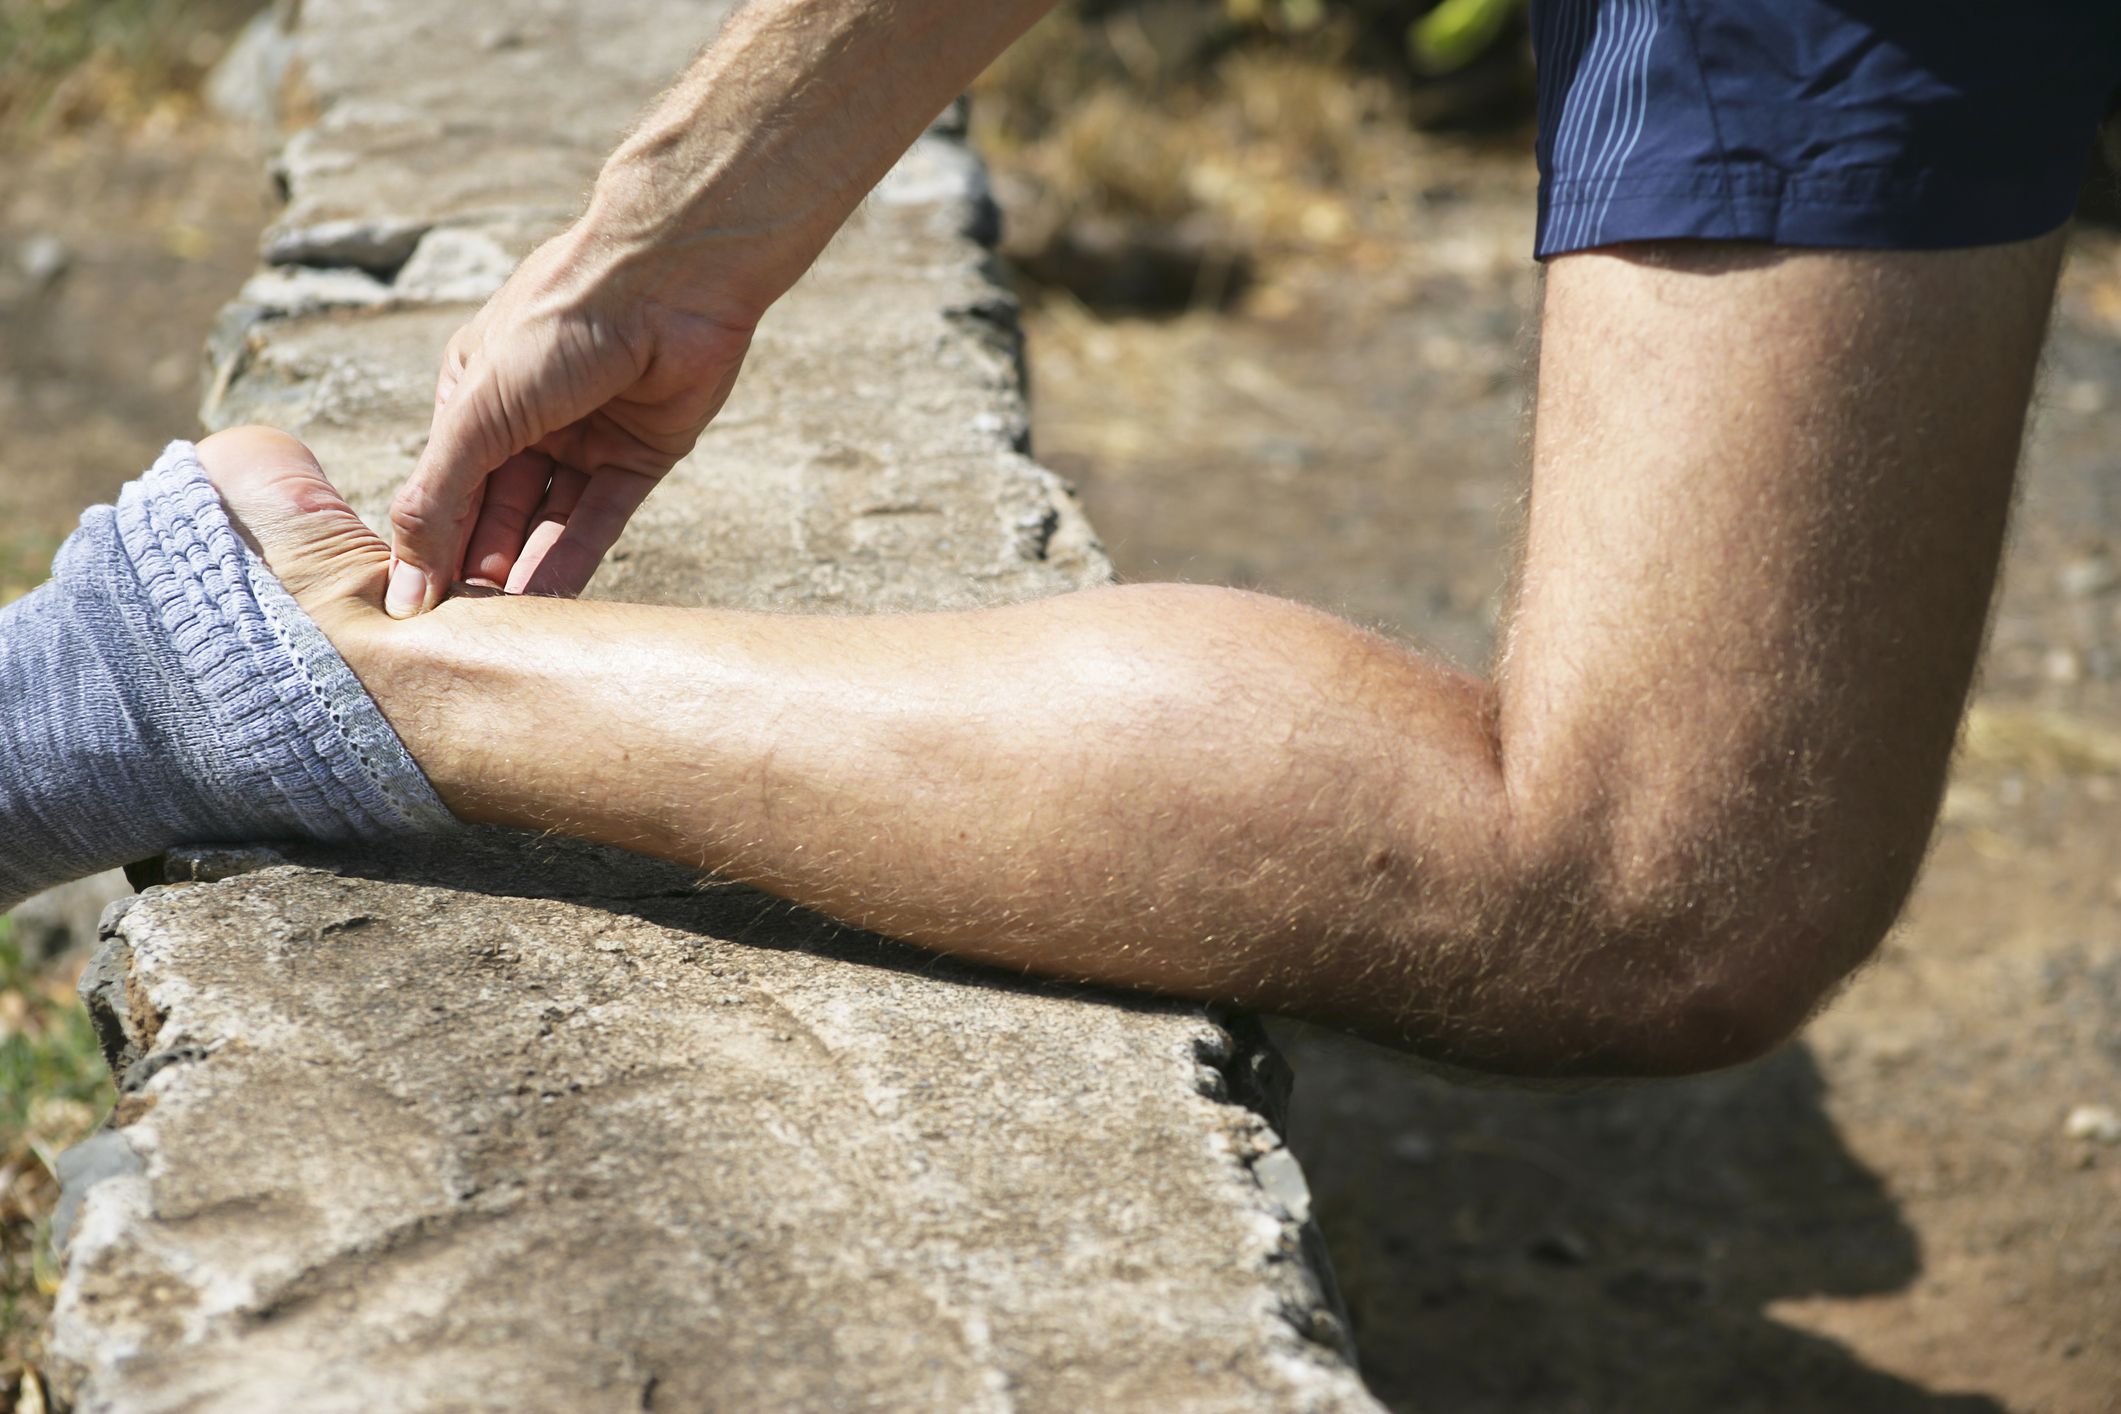 How to Relieve Achilles Tendonitis in SECONDS 